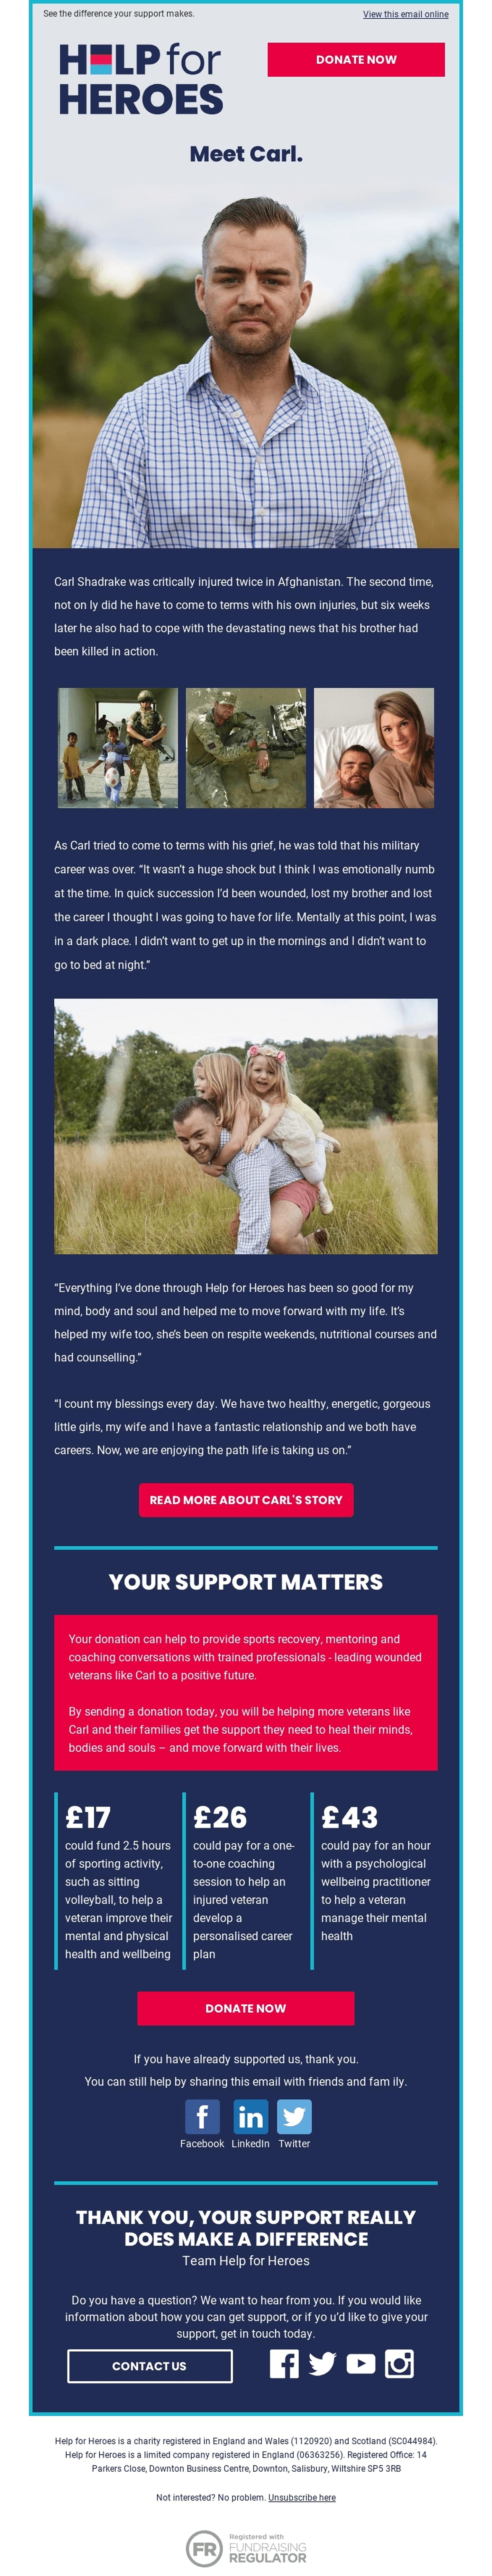  Help for Heroes email using hope as an emotional trigger by telling real stories